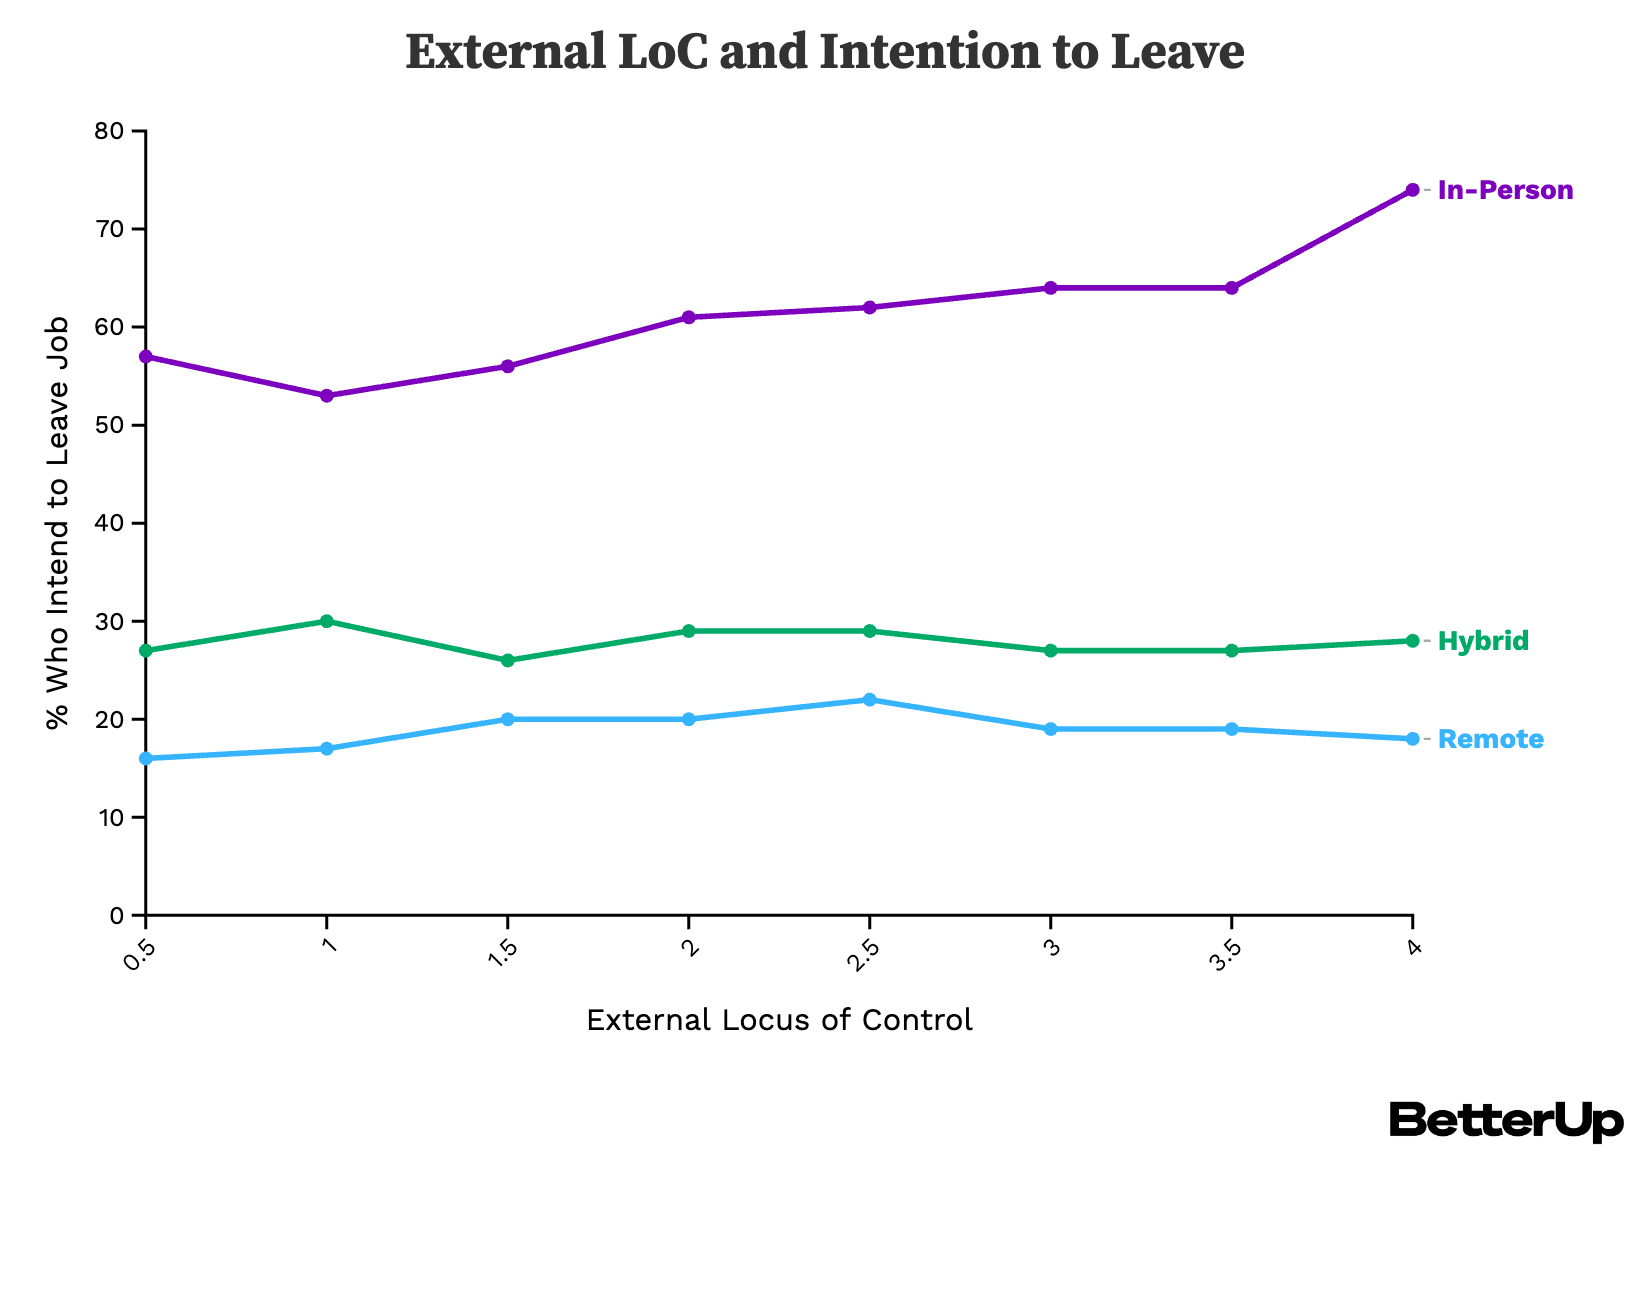 line graph showing external locus of control and intention to leave between remote, in-person, and hybrid workers